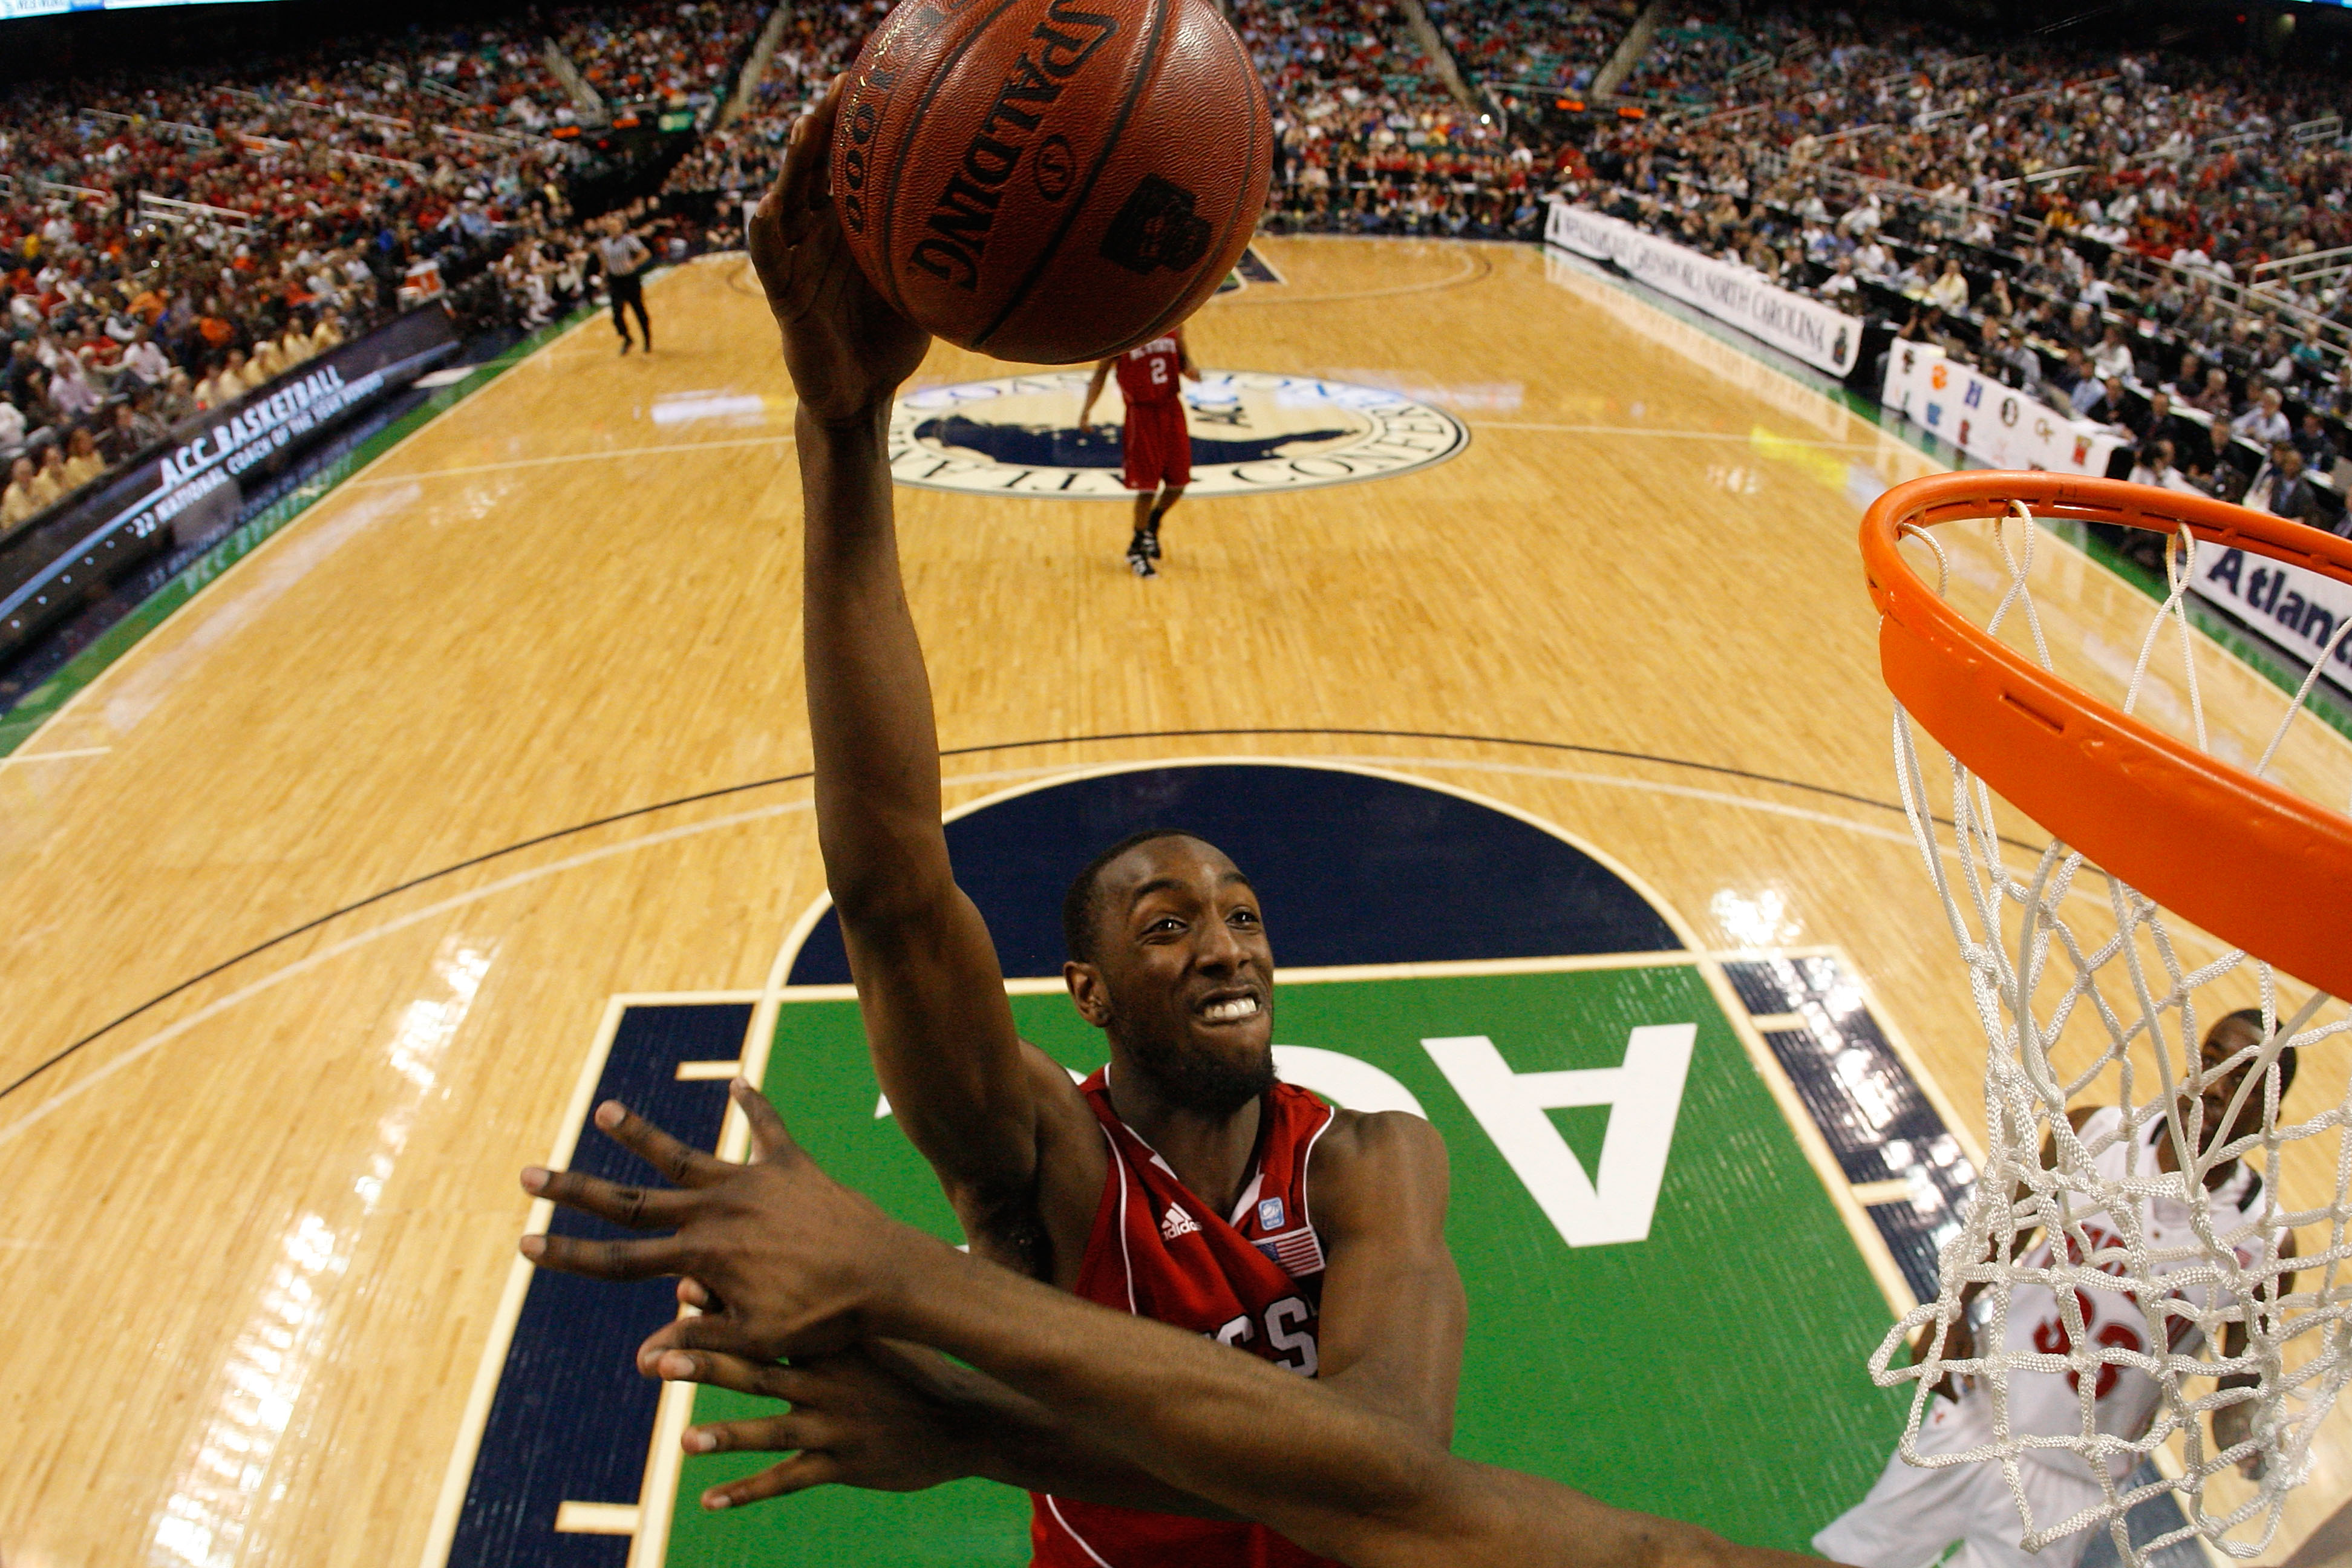 GREENSBORO, NC - MARCH 10:  C.J. Leslie #5 of the North Carolina State Wolfpack shoots against the Maryland Terrapins during the second half of the game in the first round of the 2011 ACC men's basketball tournament at the Greensboro Coliseum on March 10,